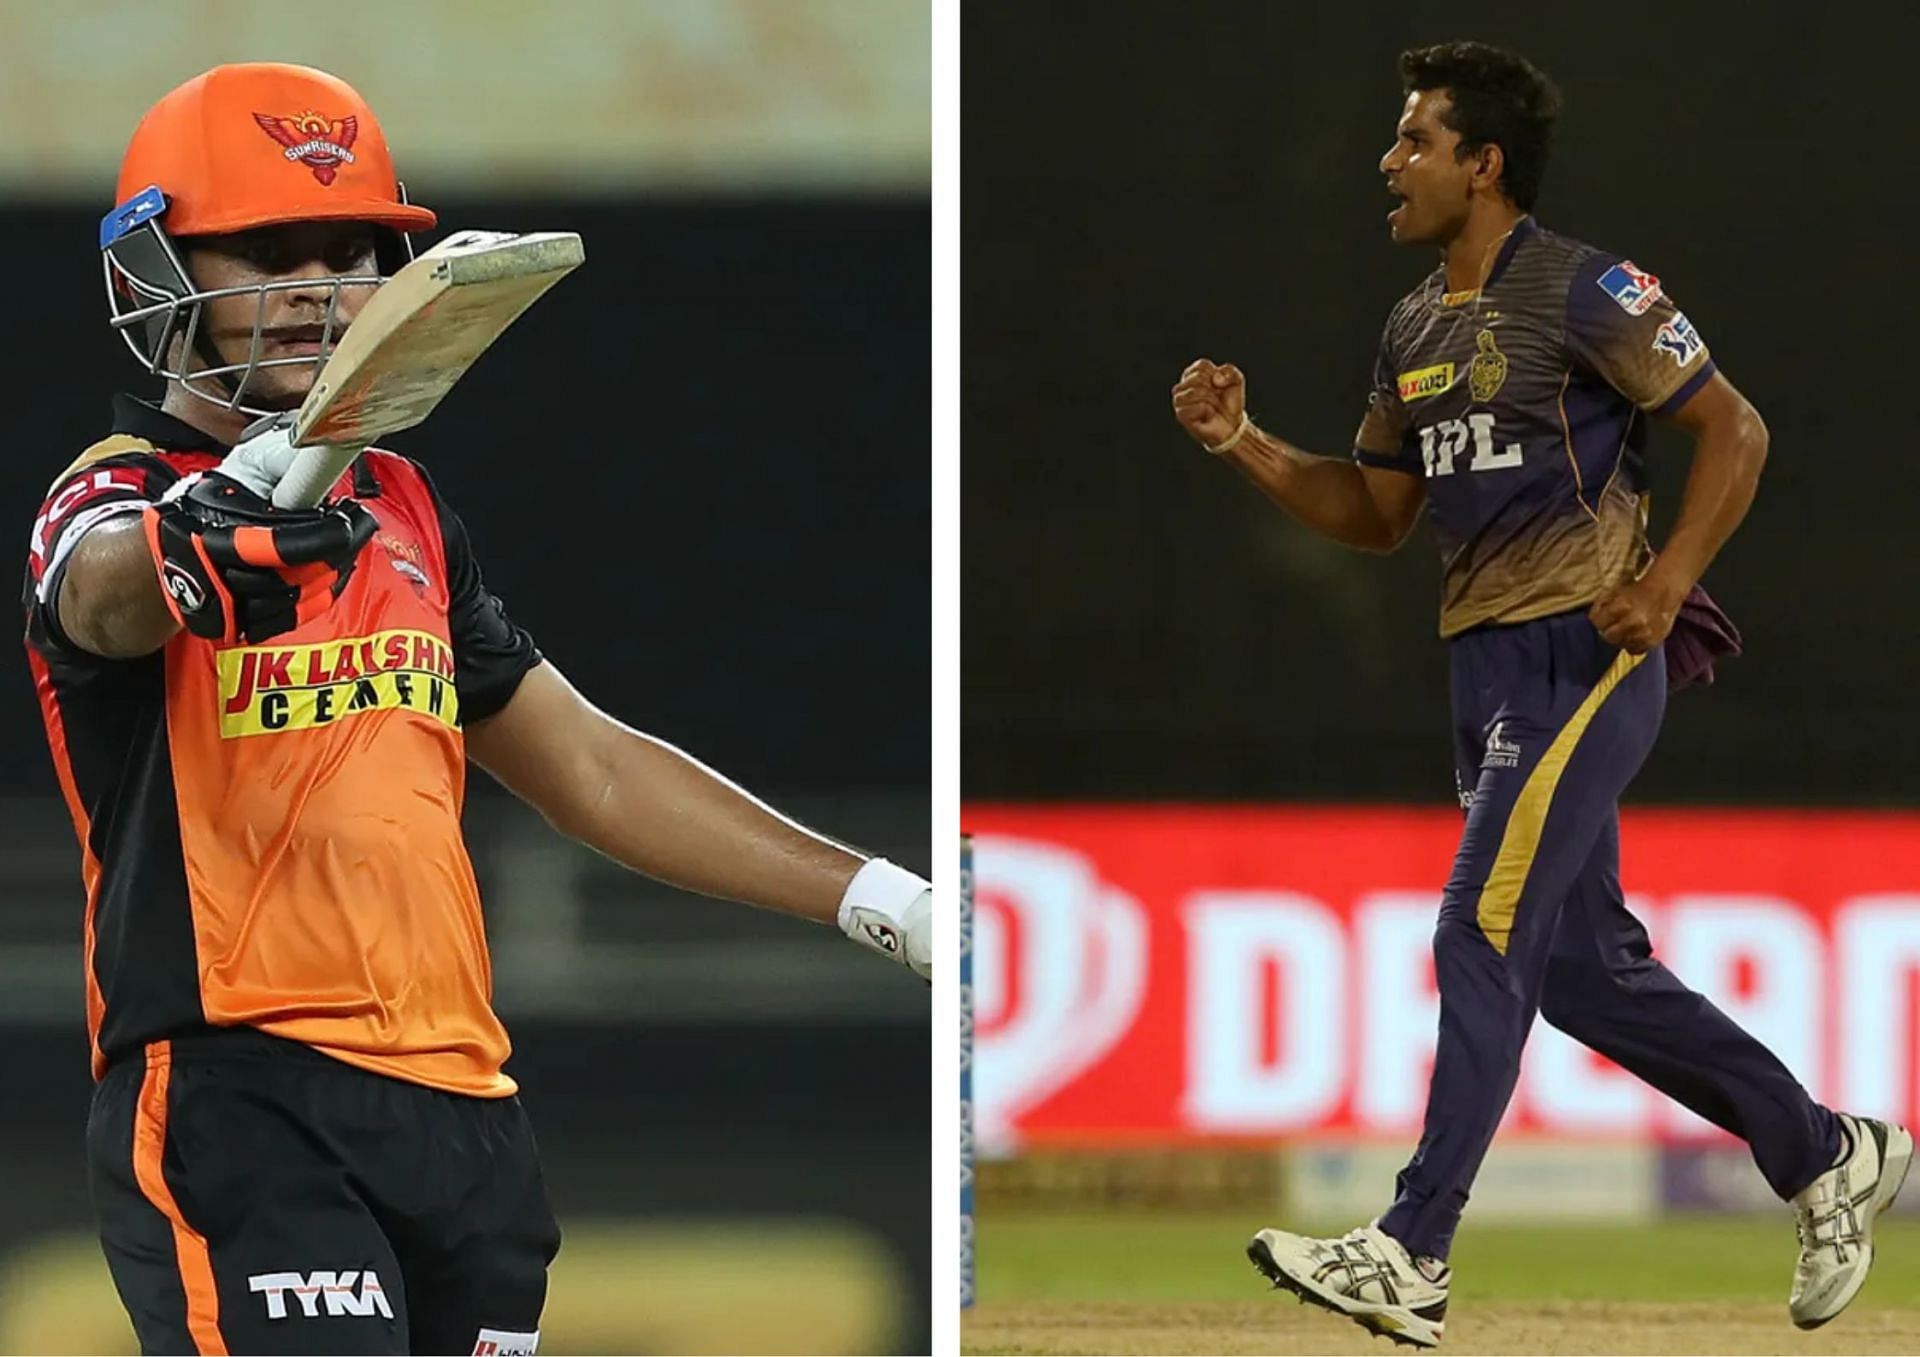 LSG could have their eyes set on a few exciting young talents from Uttar Pradesh (Picture Credits: IPL).